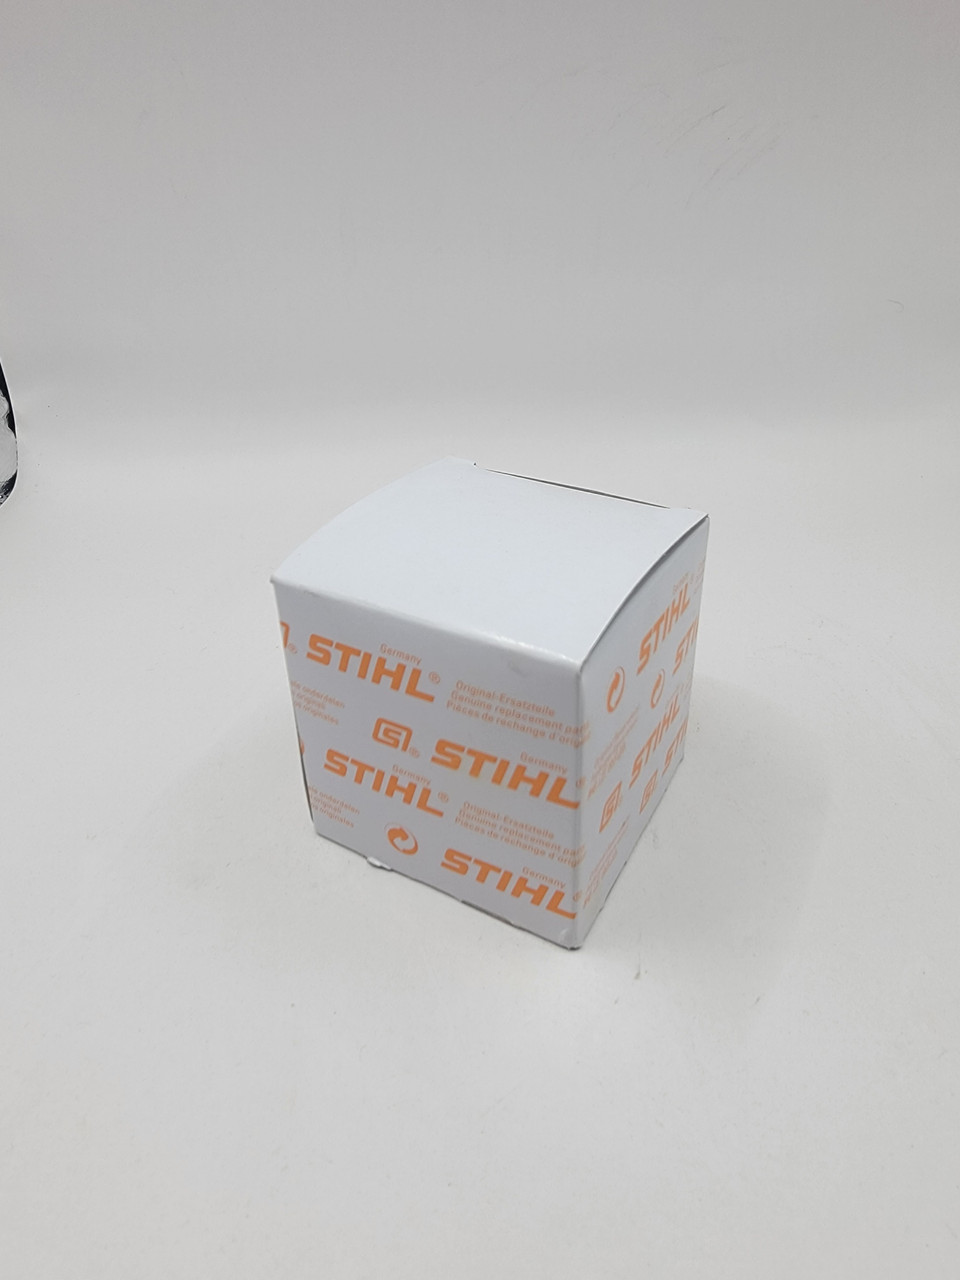 Stihl 4137 162 8900 WASHER one package